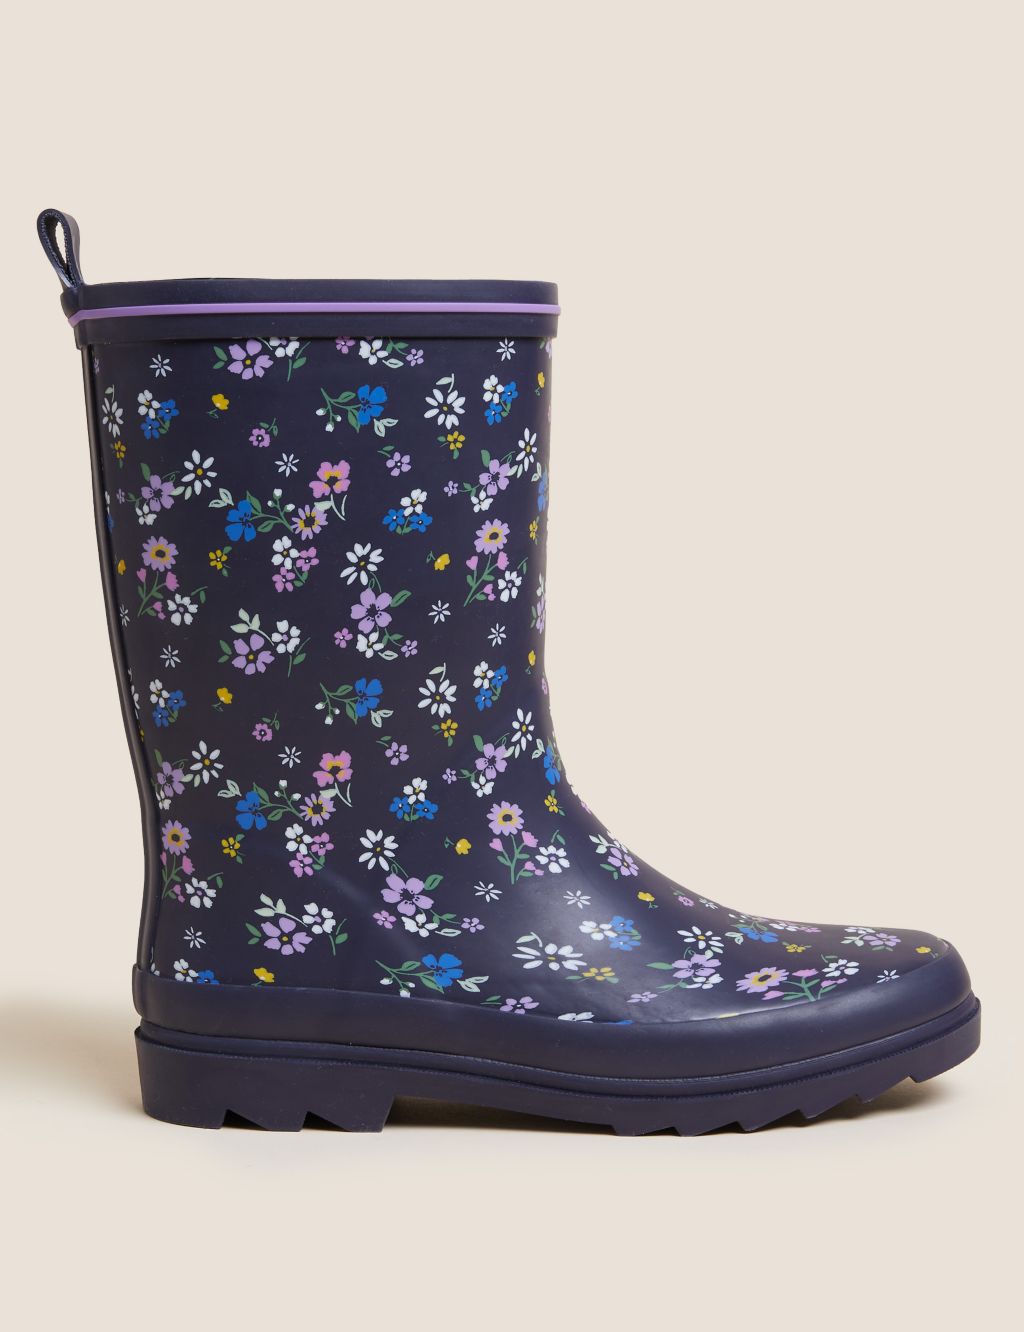 Kids' Floral Wellies (13 Small - 6 Large) image 1